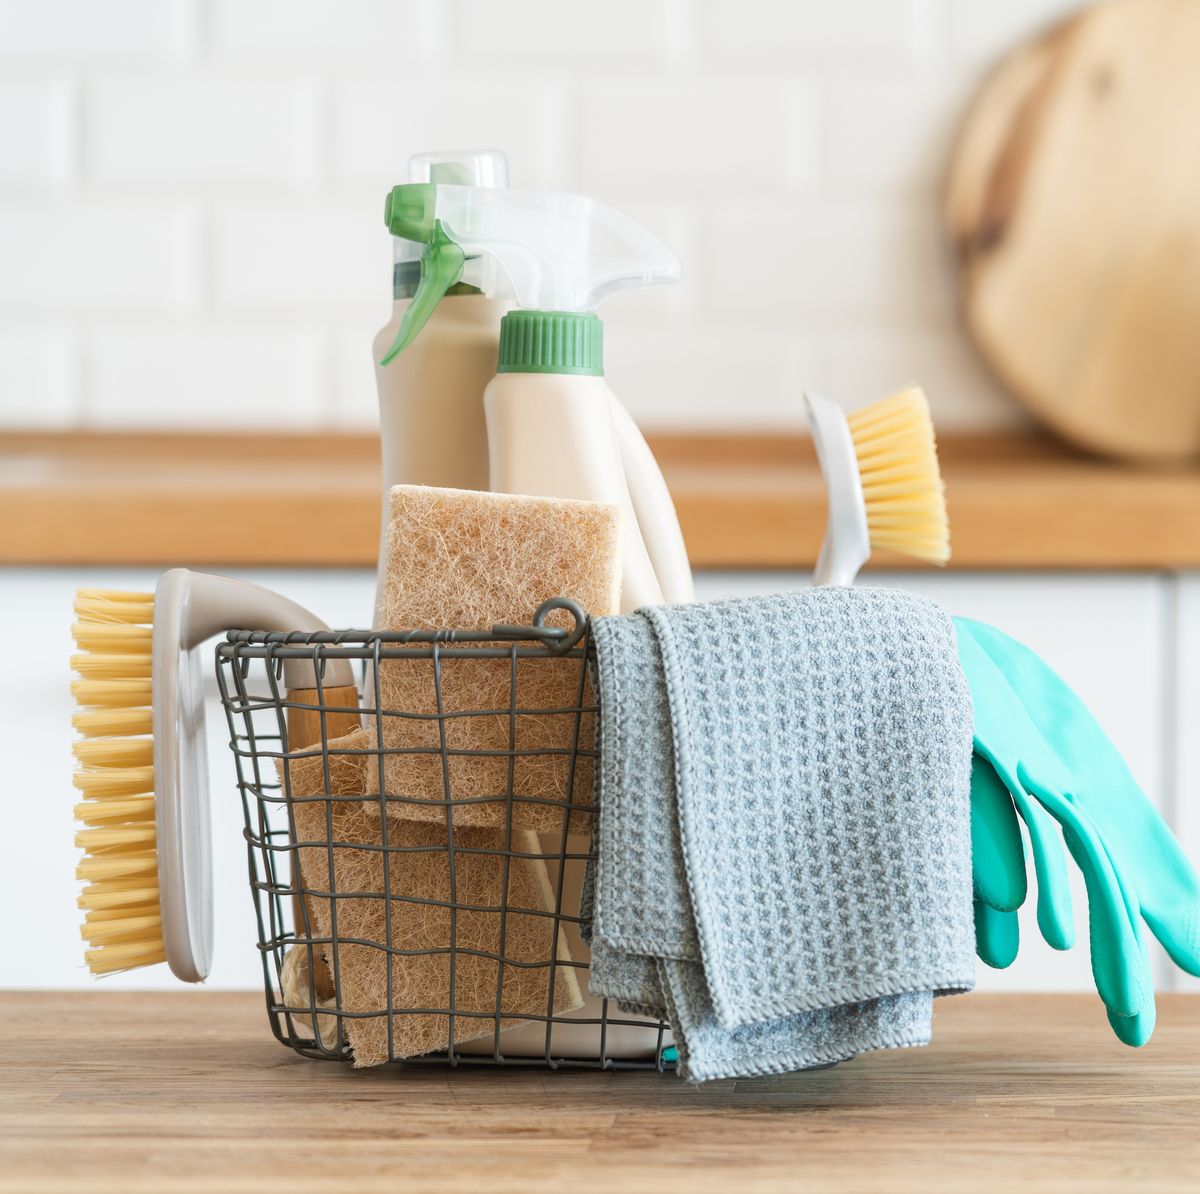 10 common cleaning mistakes you're making at home